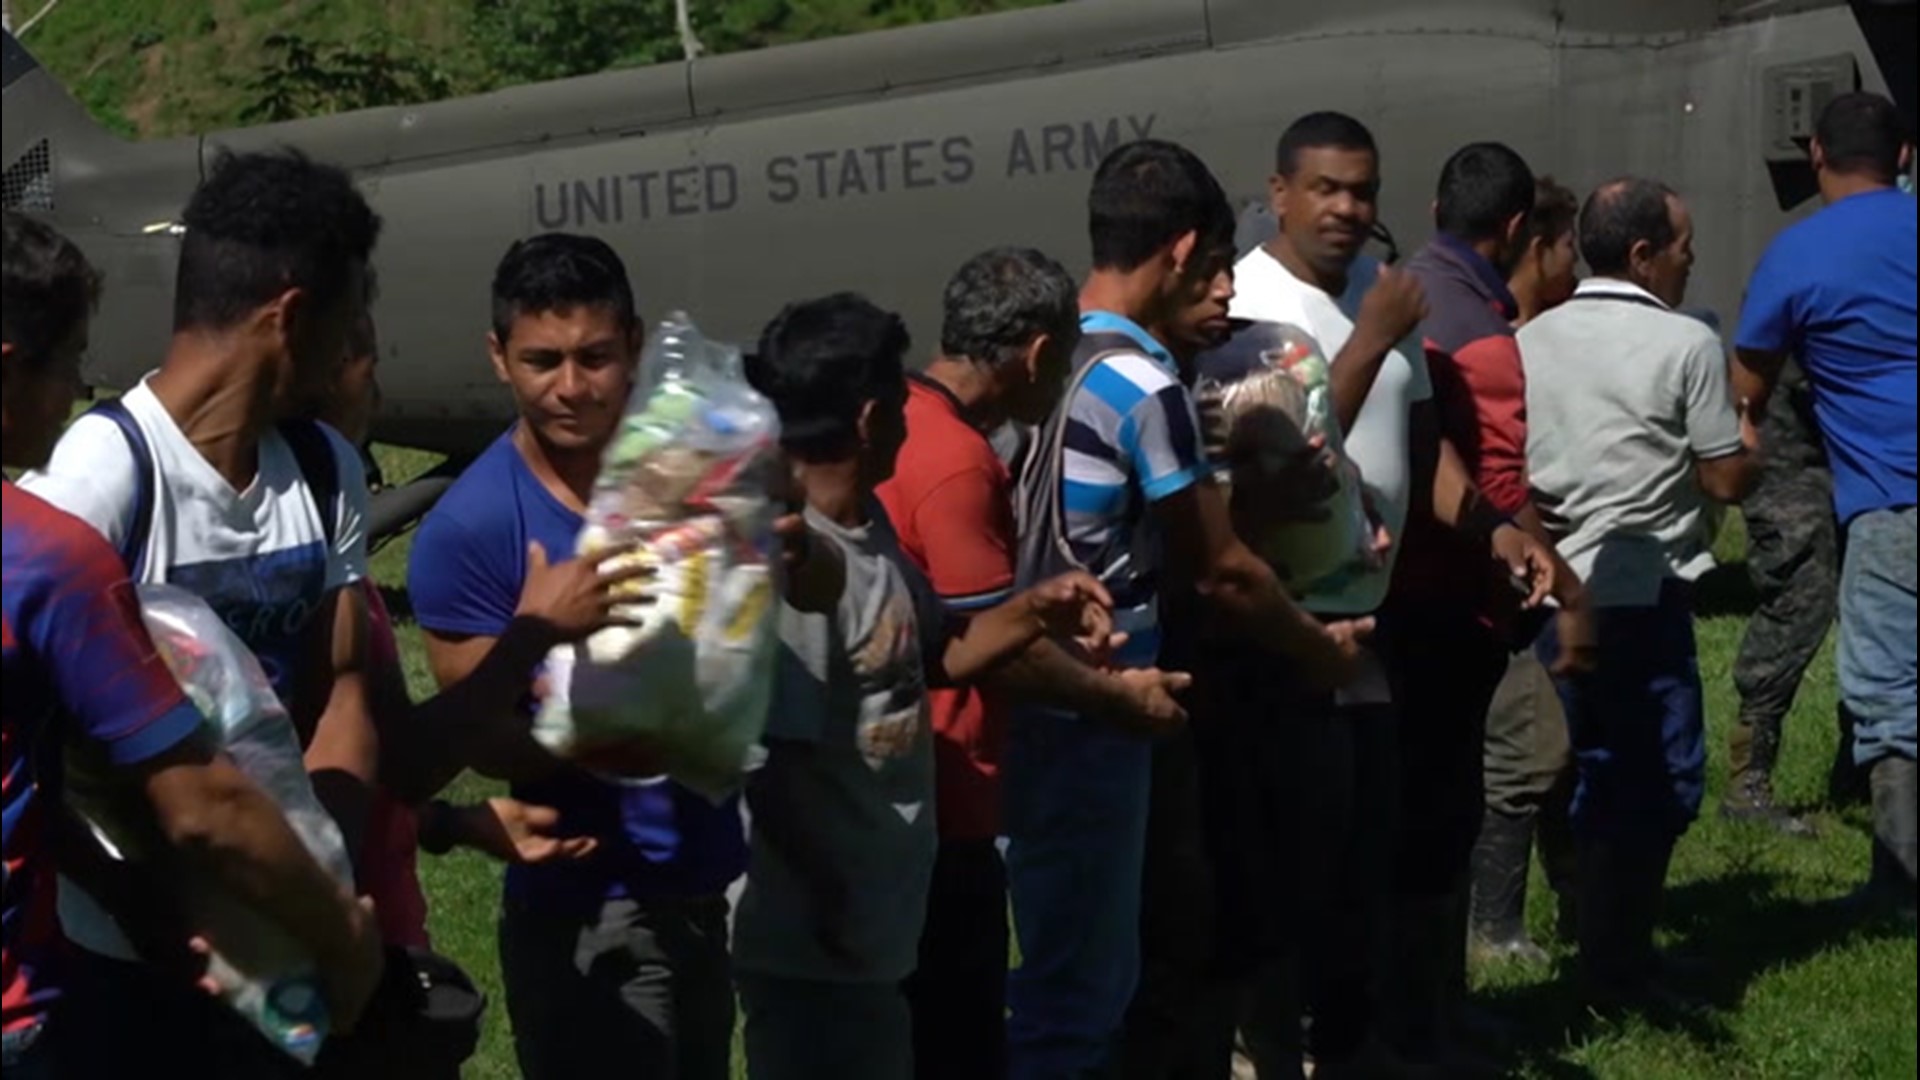 The US Military delivered humanitarian aid packages to communities in Honduras on Nov. 29, to help the country recover from both Hurricanes Eta and Iota.